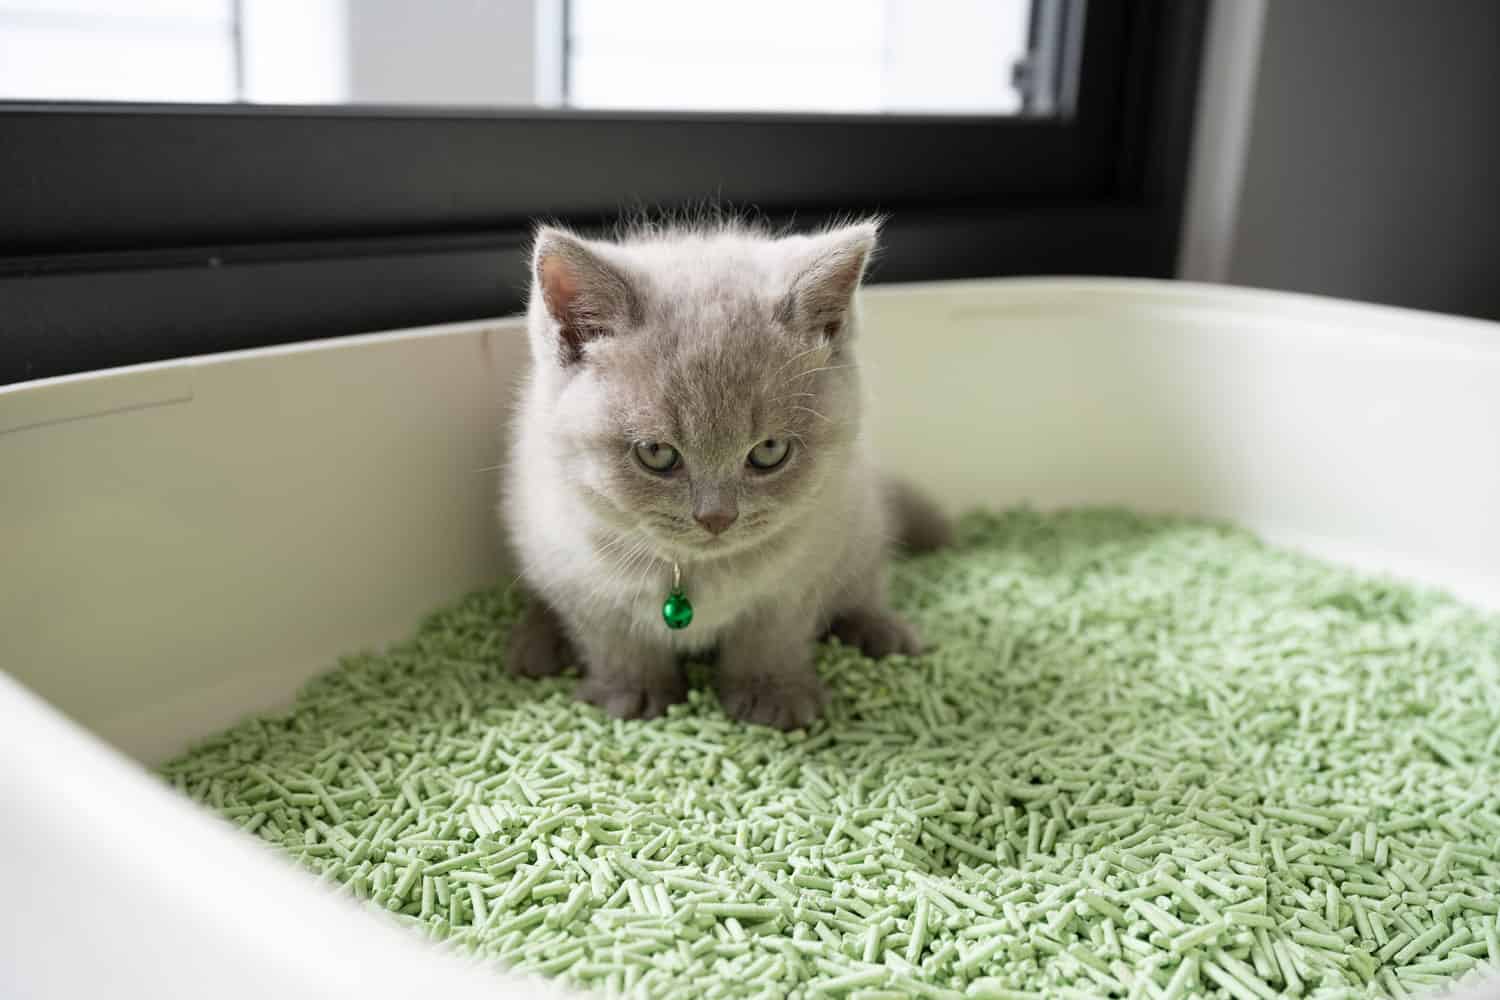 When Can Cats Use Clumping Litter?